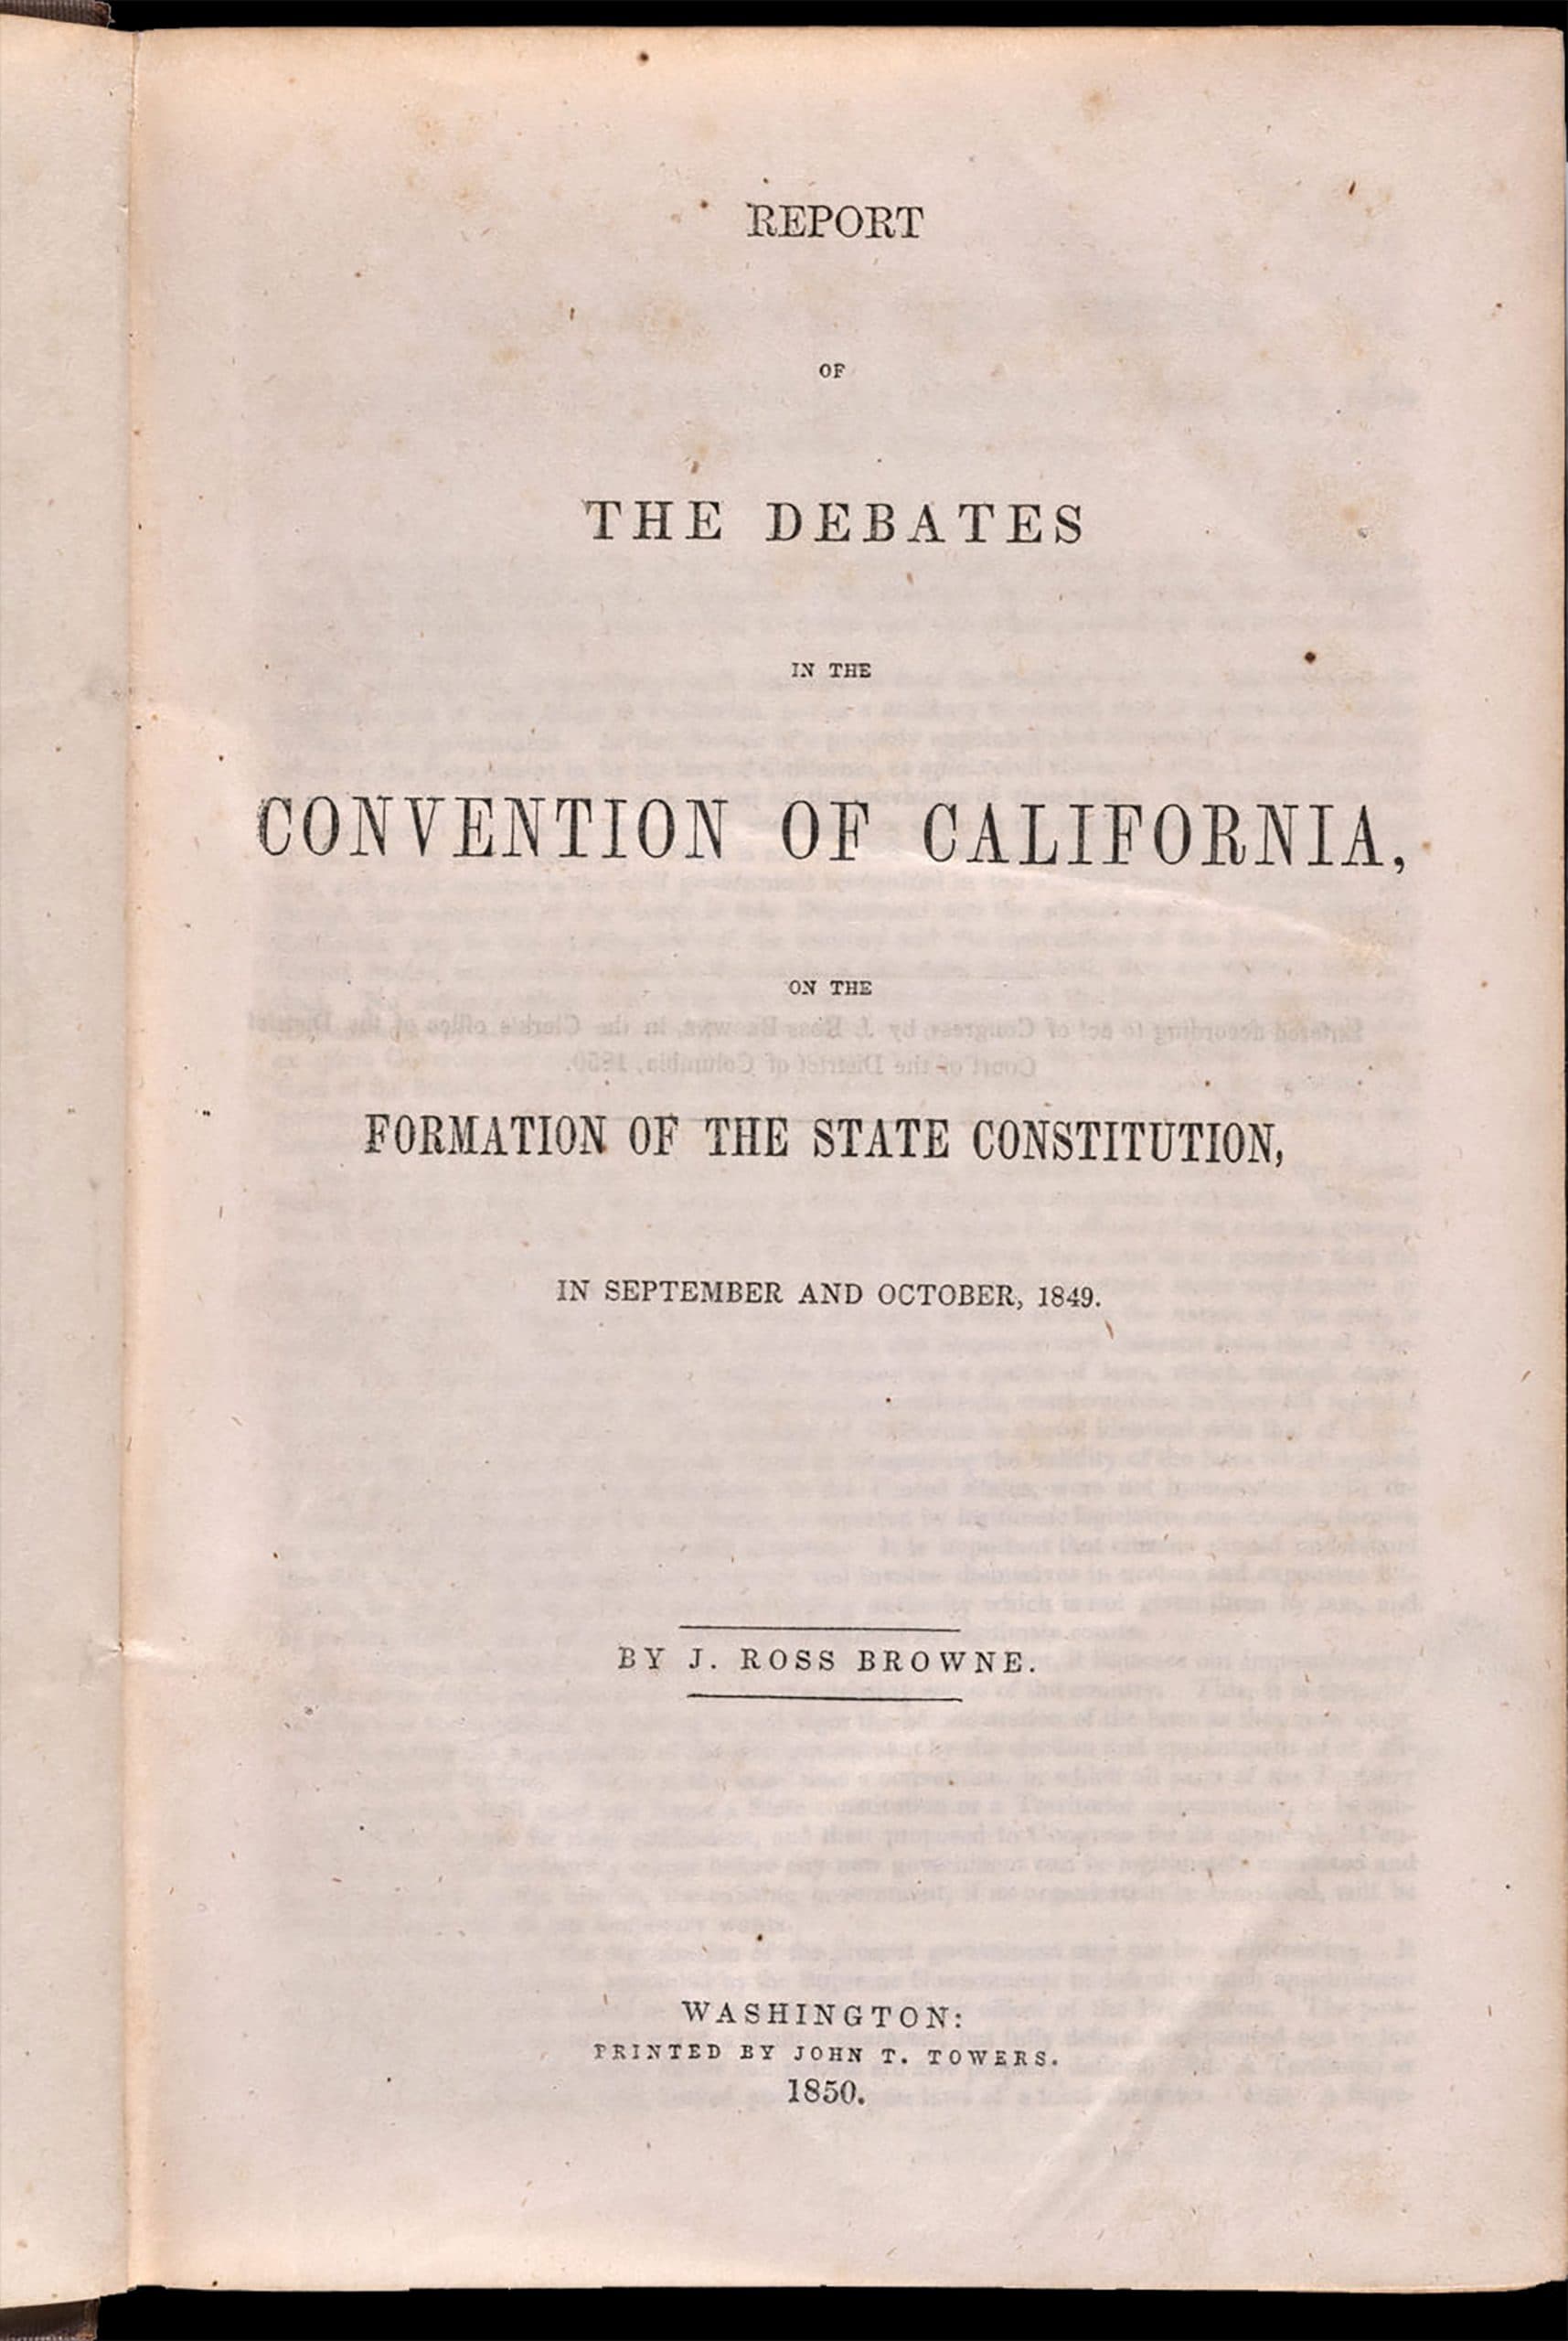 Debates of the California Convention of 1849 | Colonists Citizens ...